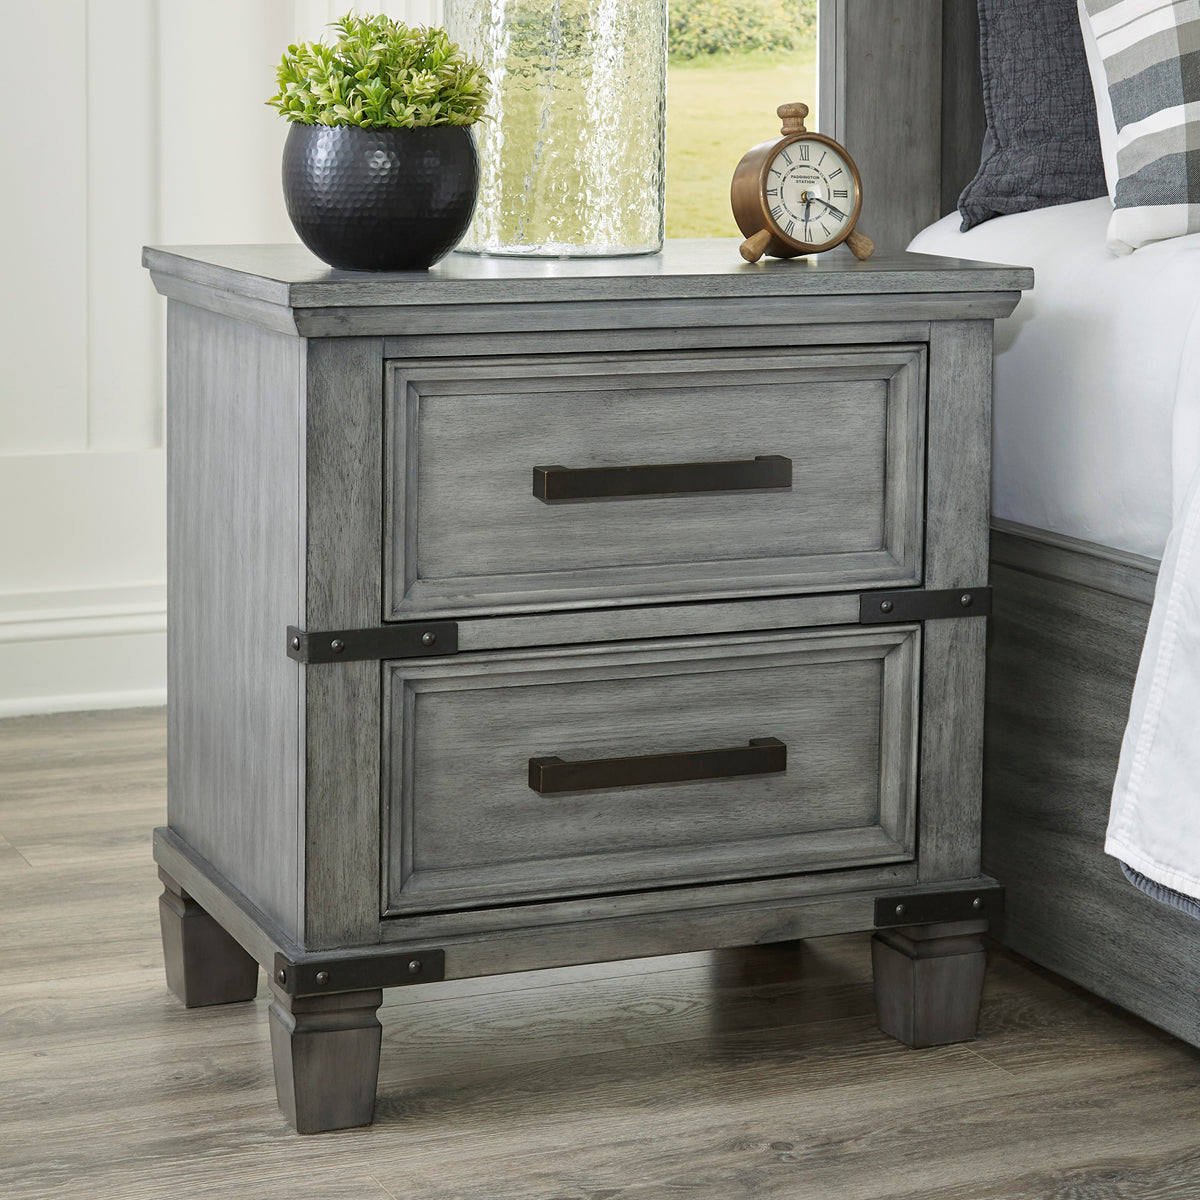 Shop Nightstands at JR Furniture Store in Fayetteville, NC 28311